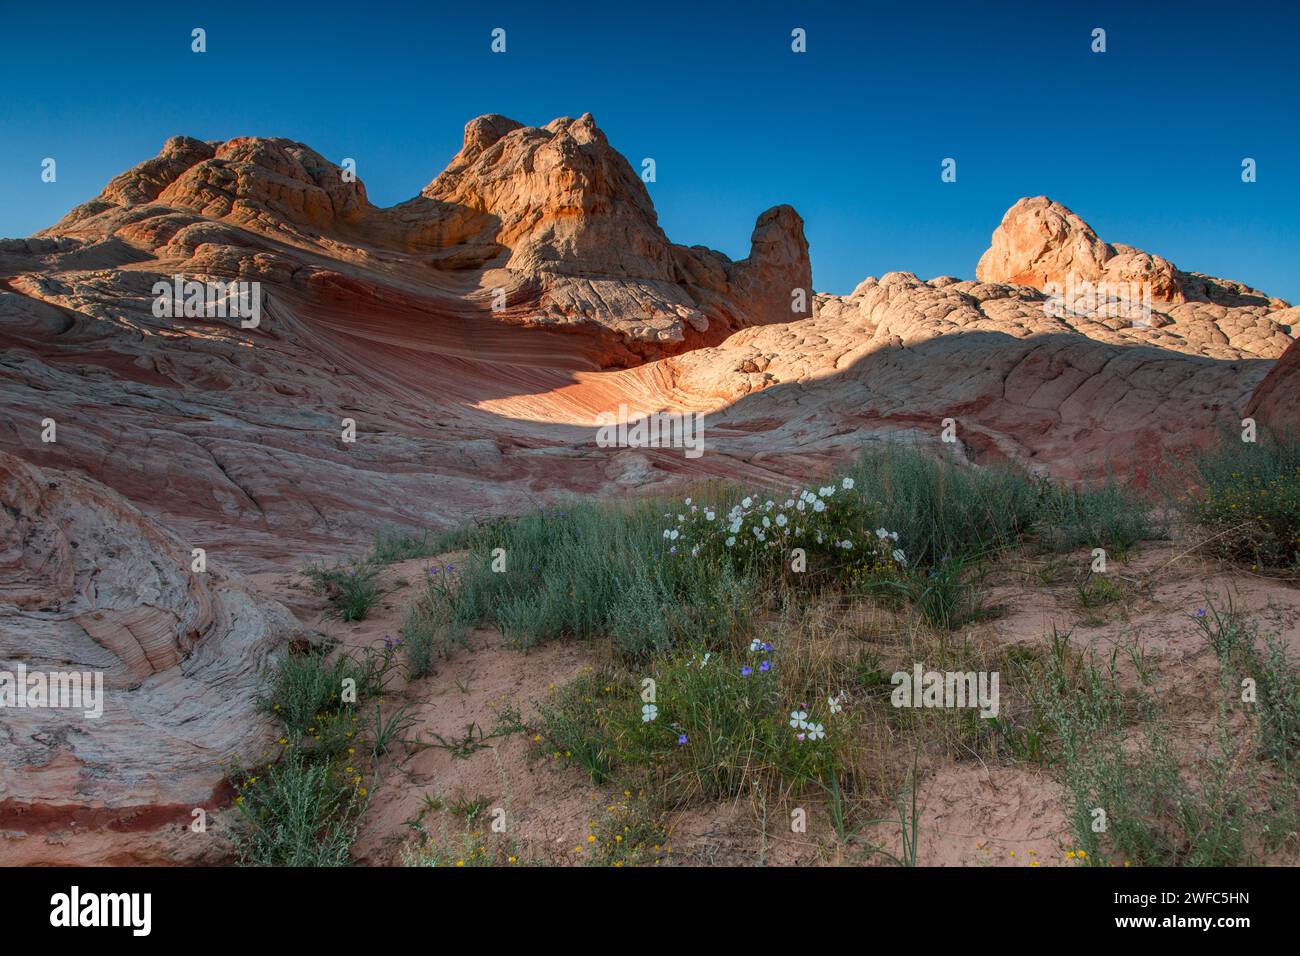 Wildflowers blooming in a patch of sand in the White Pocket Recreation Area, Vermilion Cliffs National Monument, Arizona.  Included are Pallid Evening Stock Photo